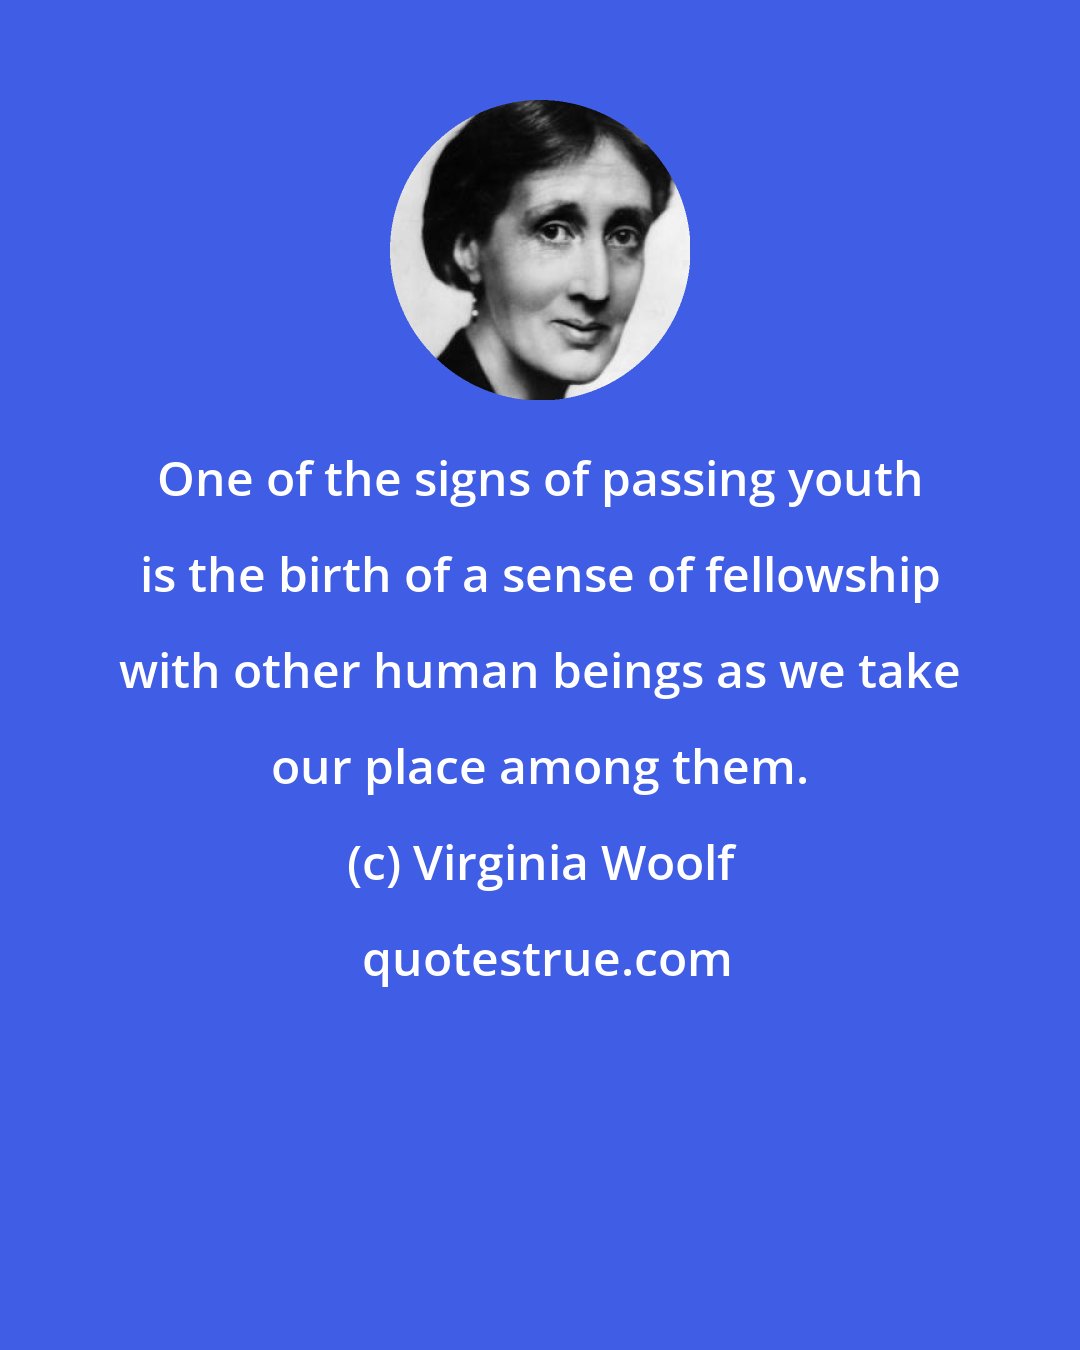 Virginia Woolf: One of the signs of passing youth is the birth of a sense of fellowship with other human beings as we take our place among them.